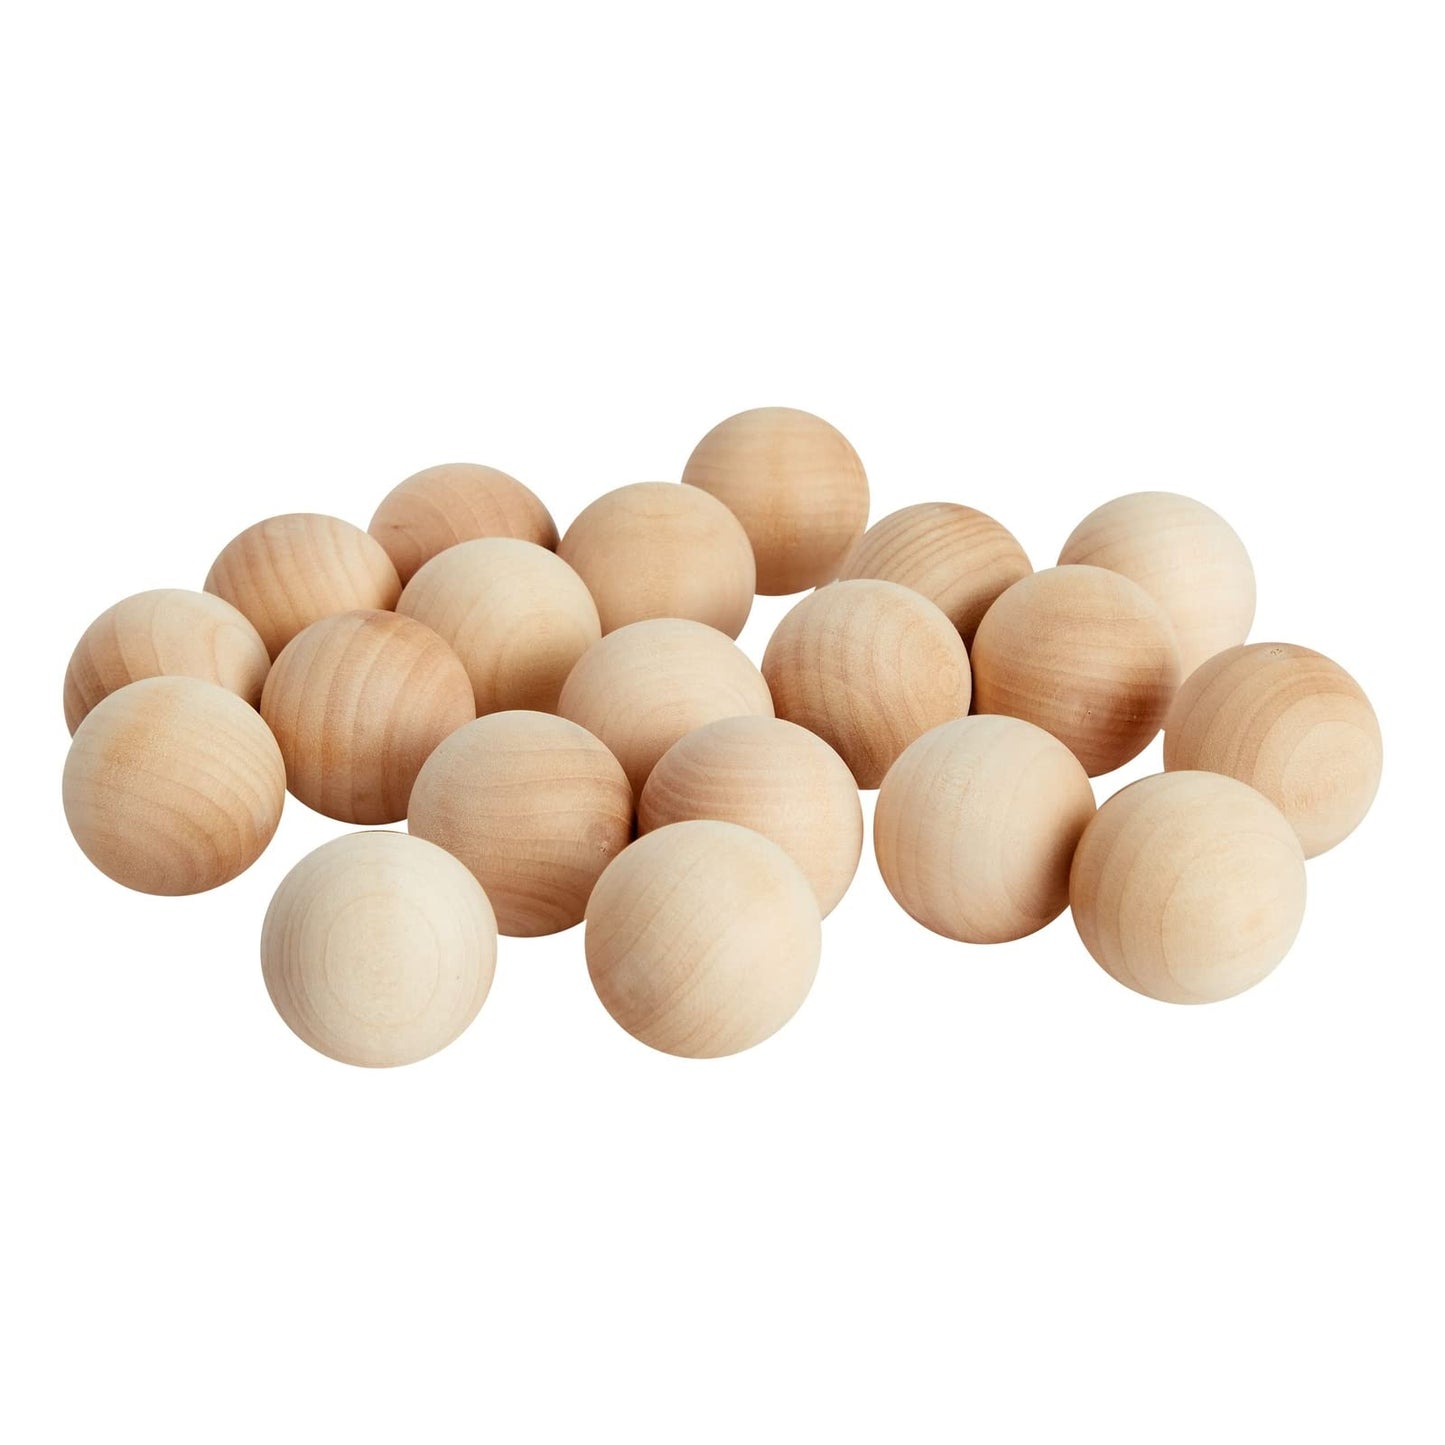 1.5 Inch Wooden Balls for Crafts, Unfinished Round Wood Spheres for DIY Projects (20 Pack)